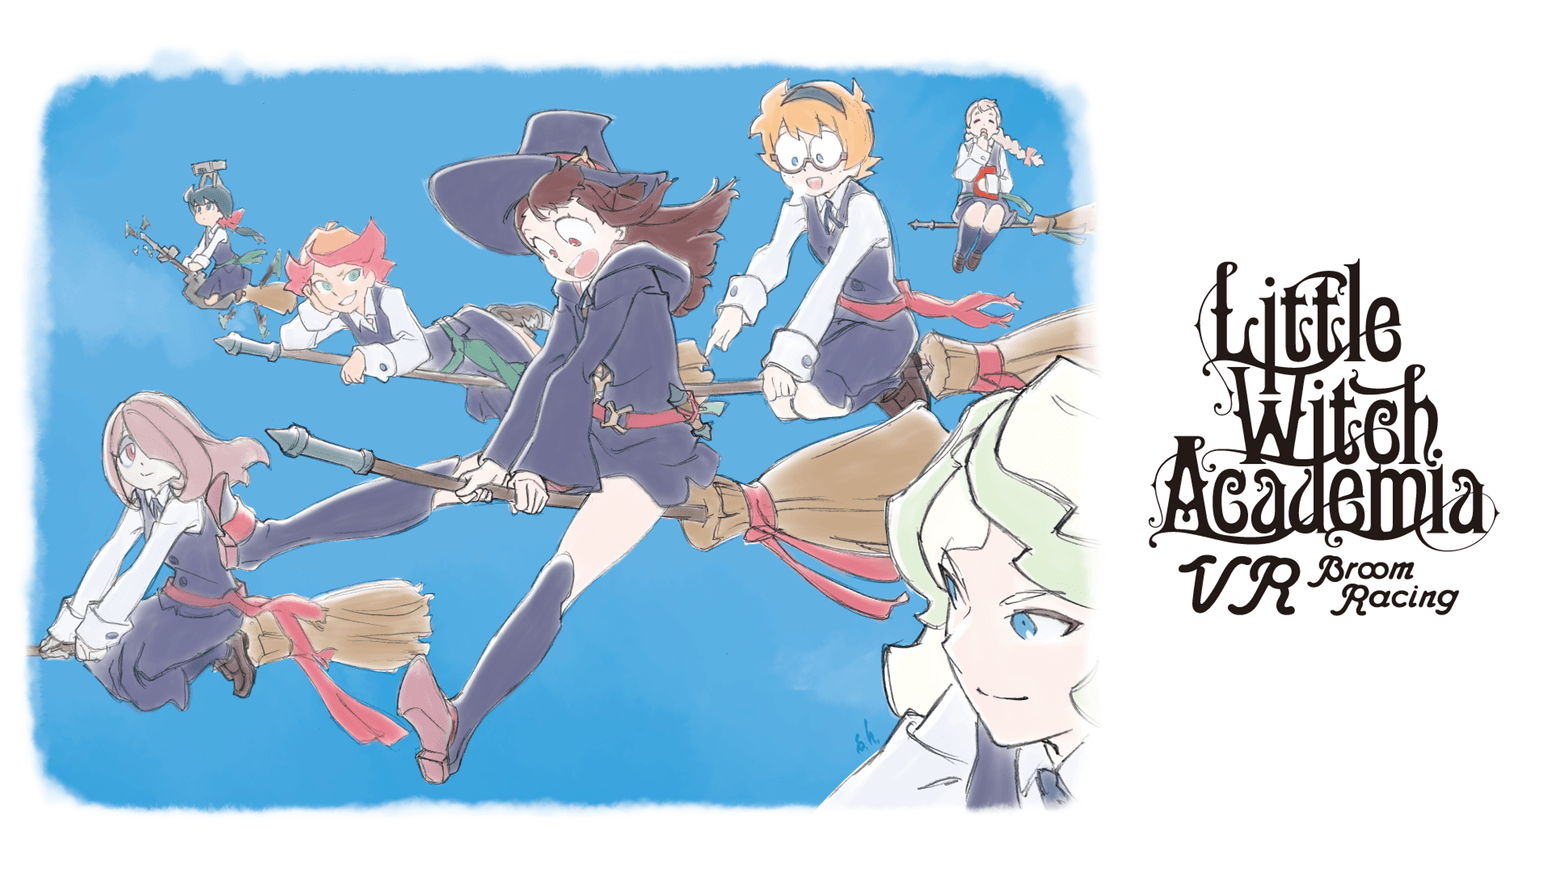 Little Witch Academia: VR Broom Racing New VR Game Project